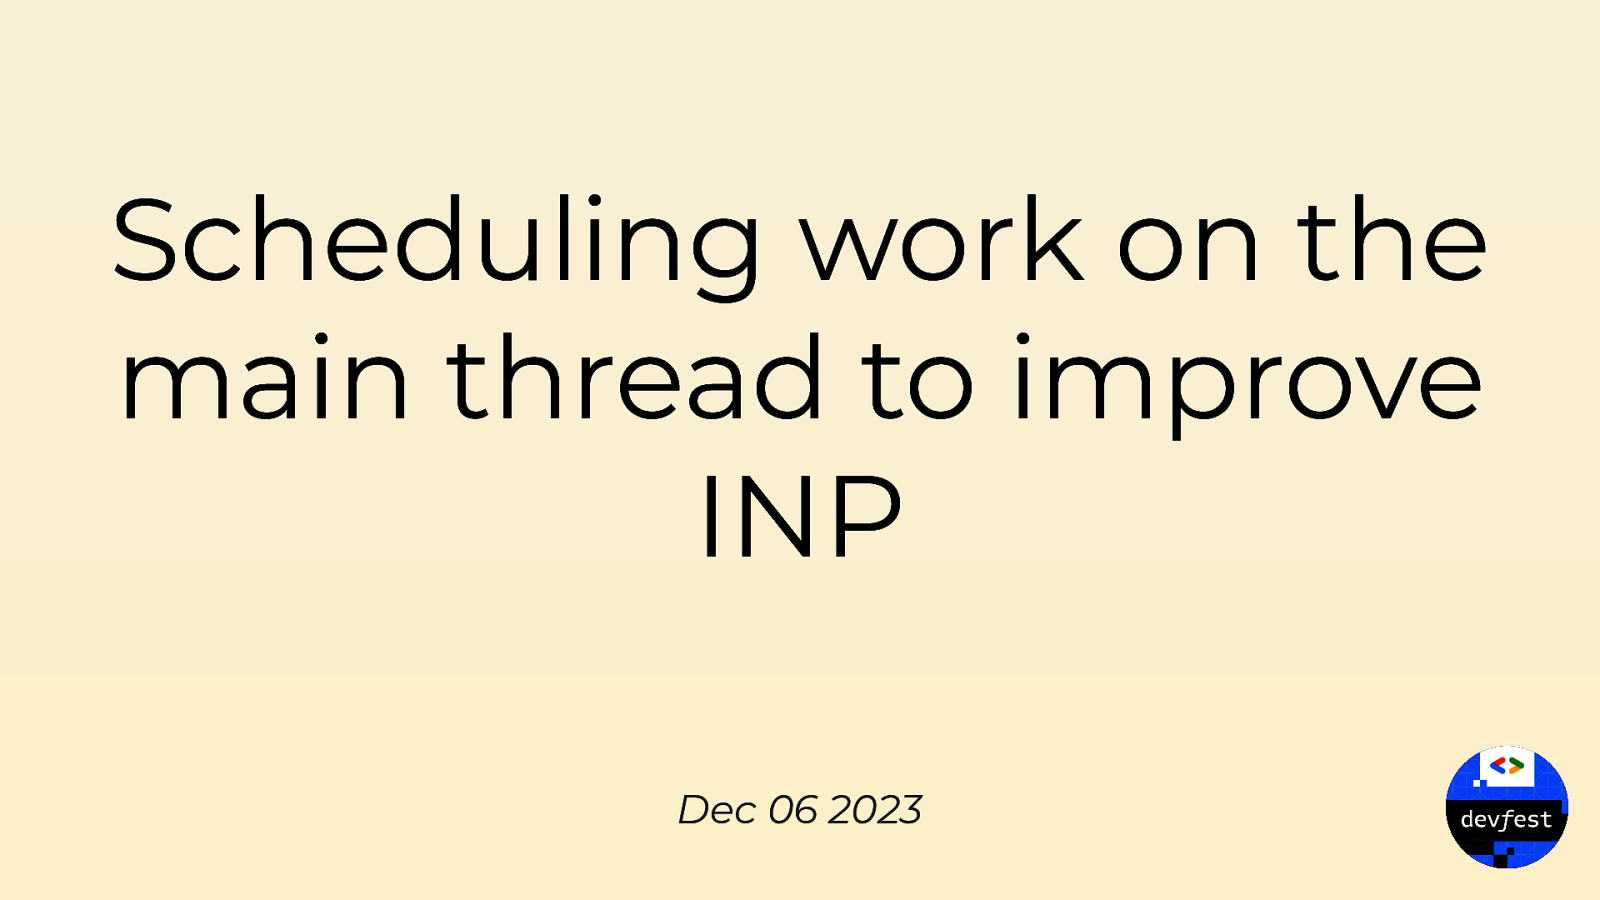 Scheduling work on the main thread to improve INP